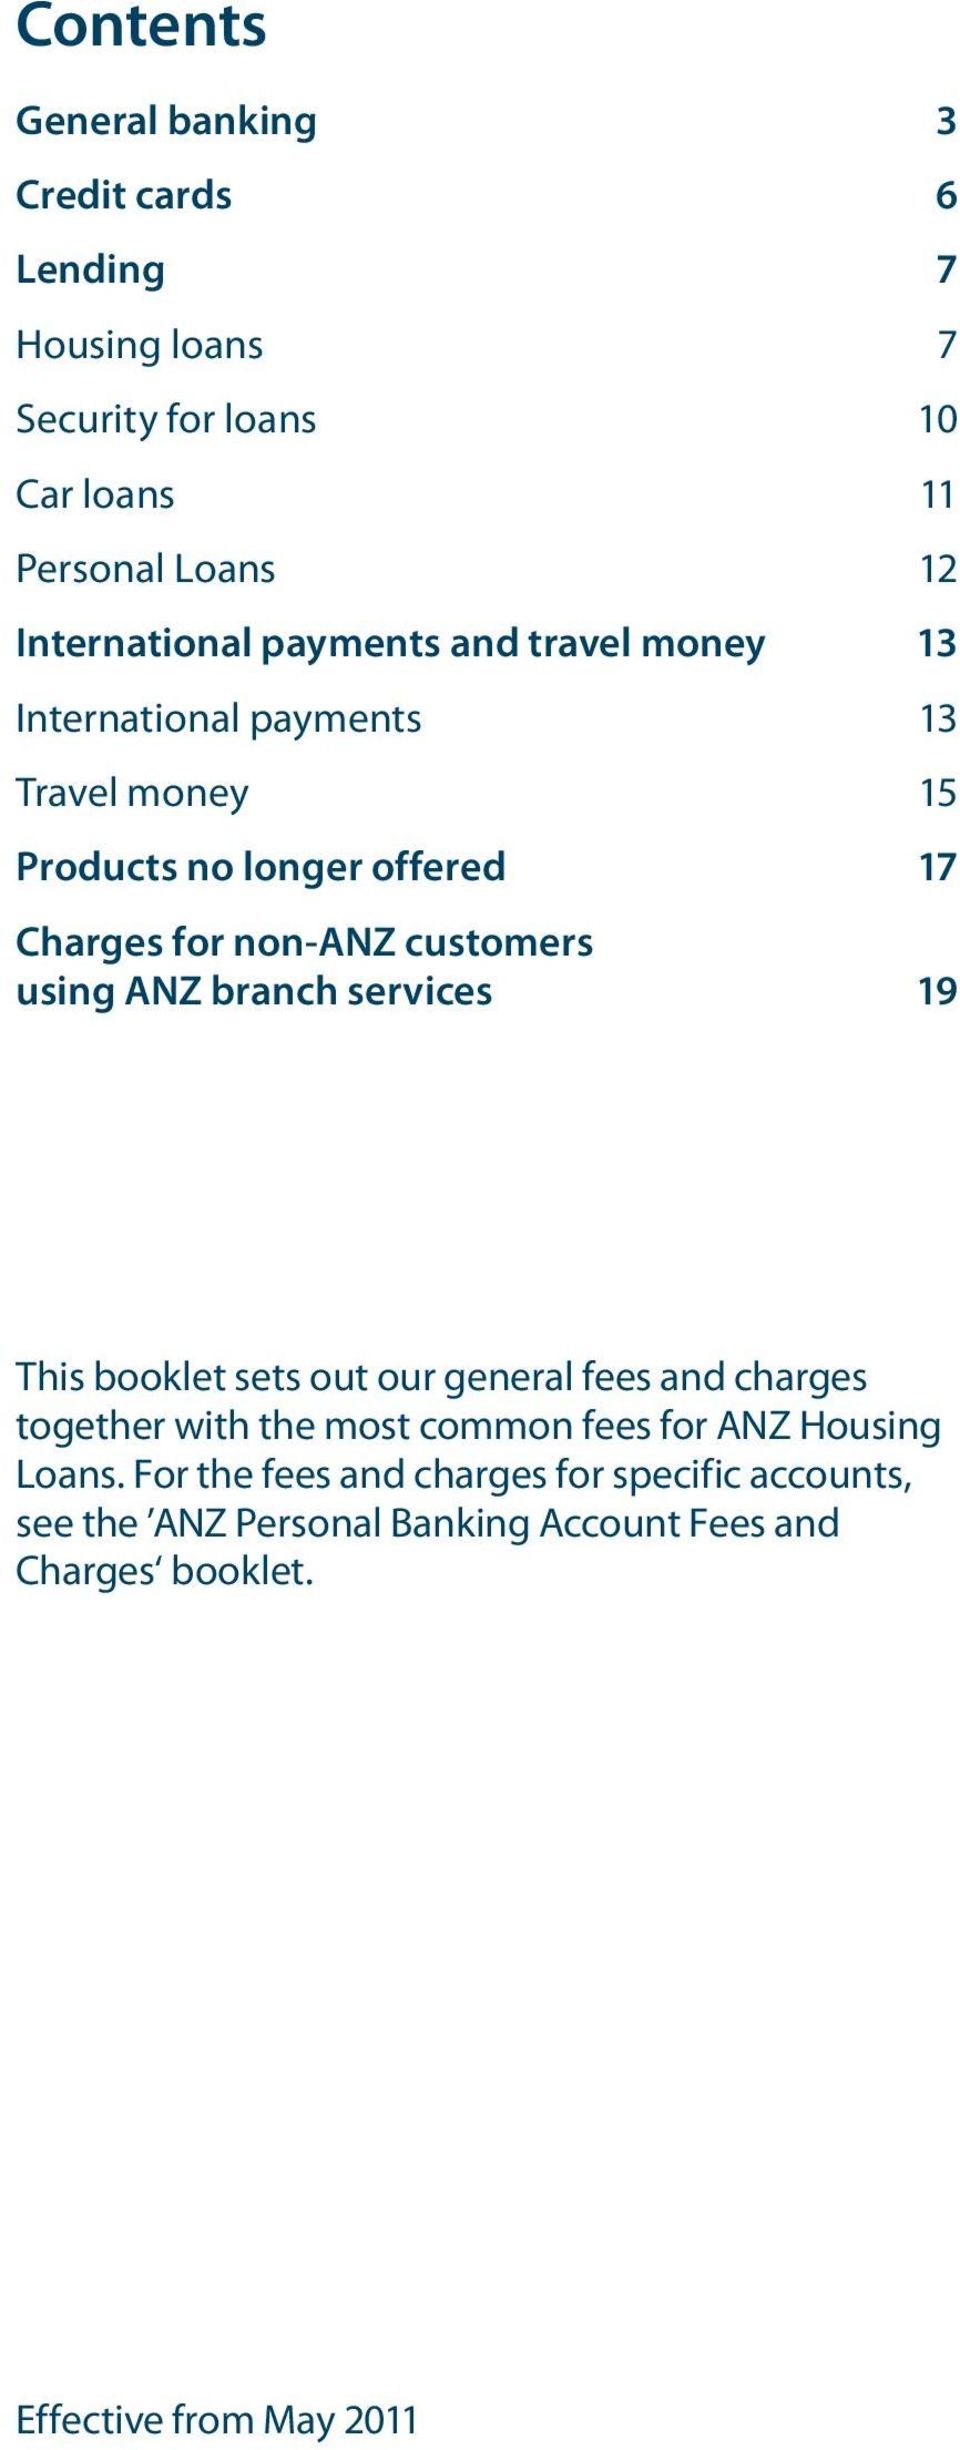 6 7 7 10 11 12 13 13 15 17 19 This booklet sets out our general fees and charges together with the most common fees for ANZ Housing